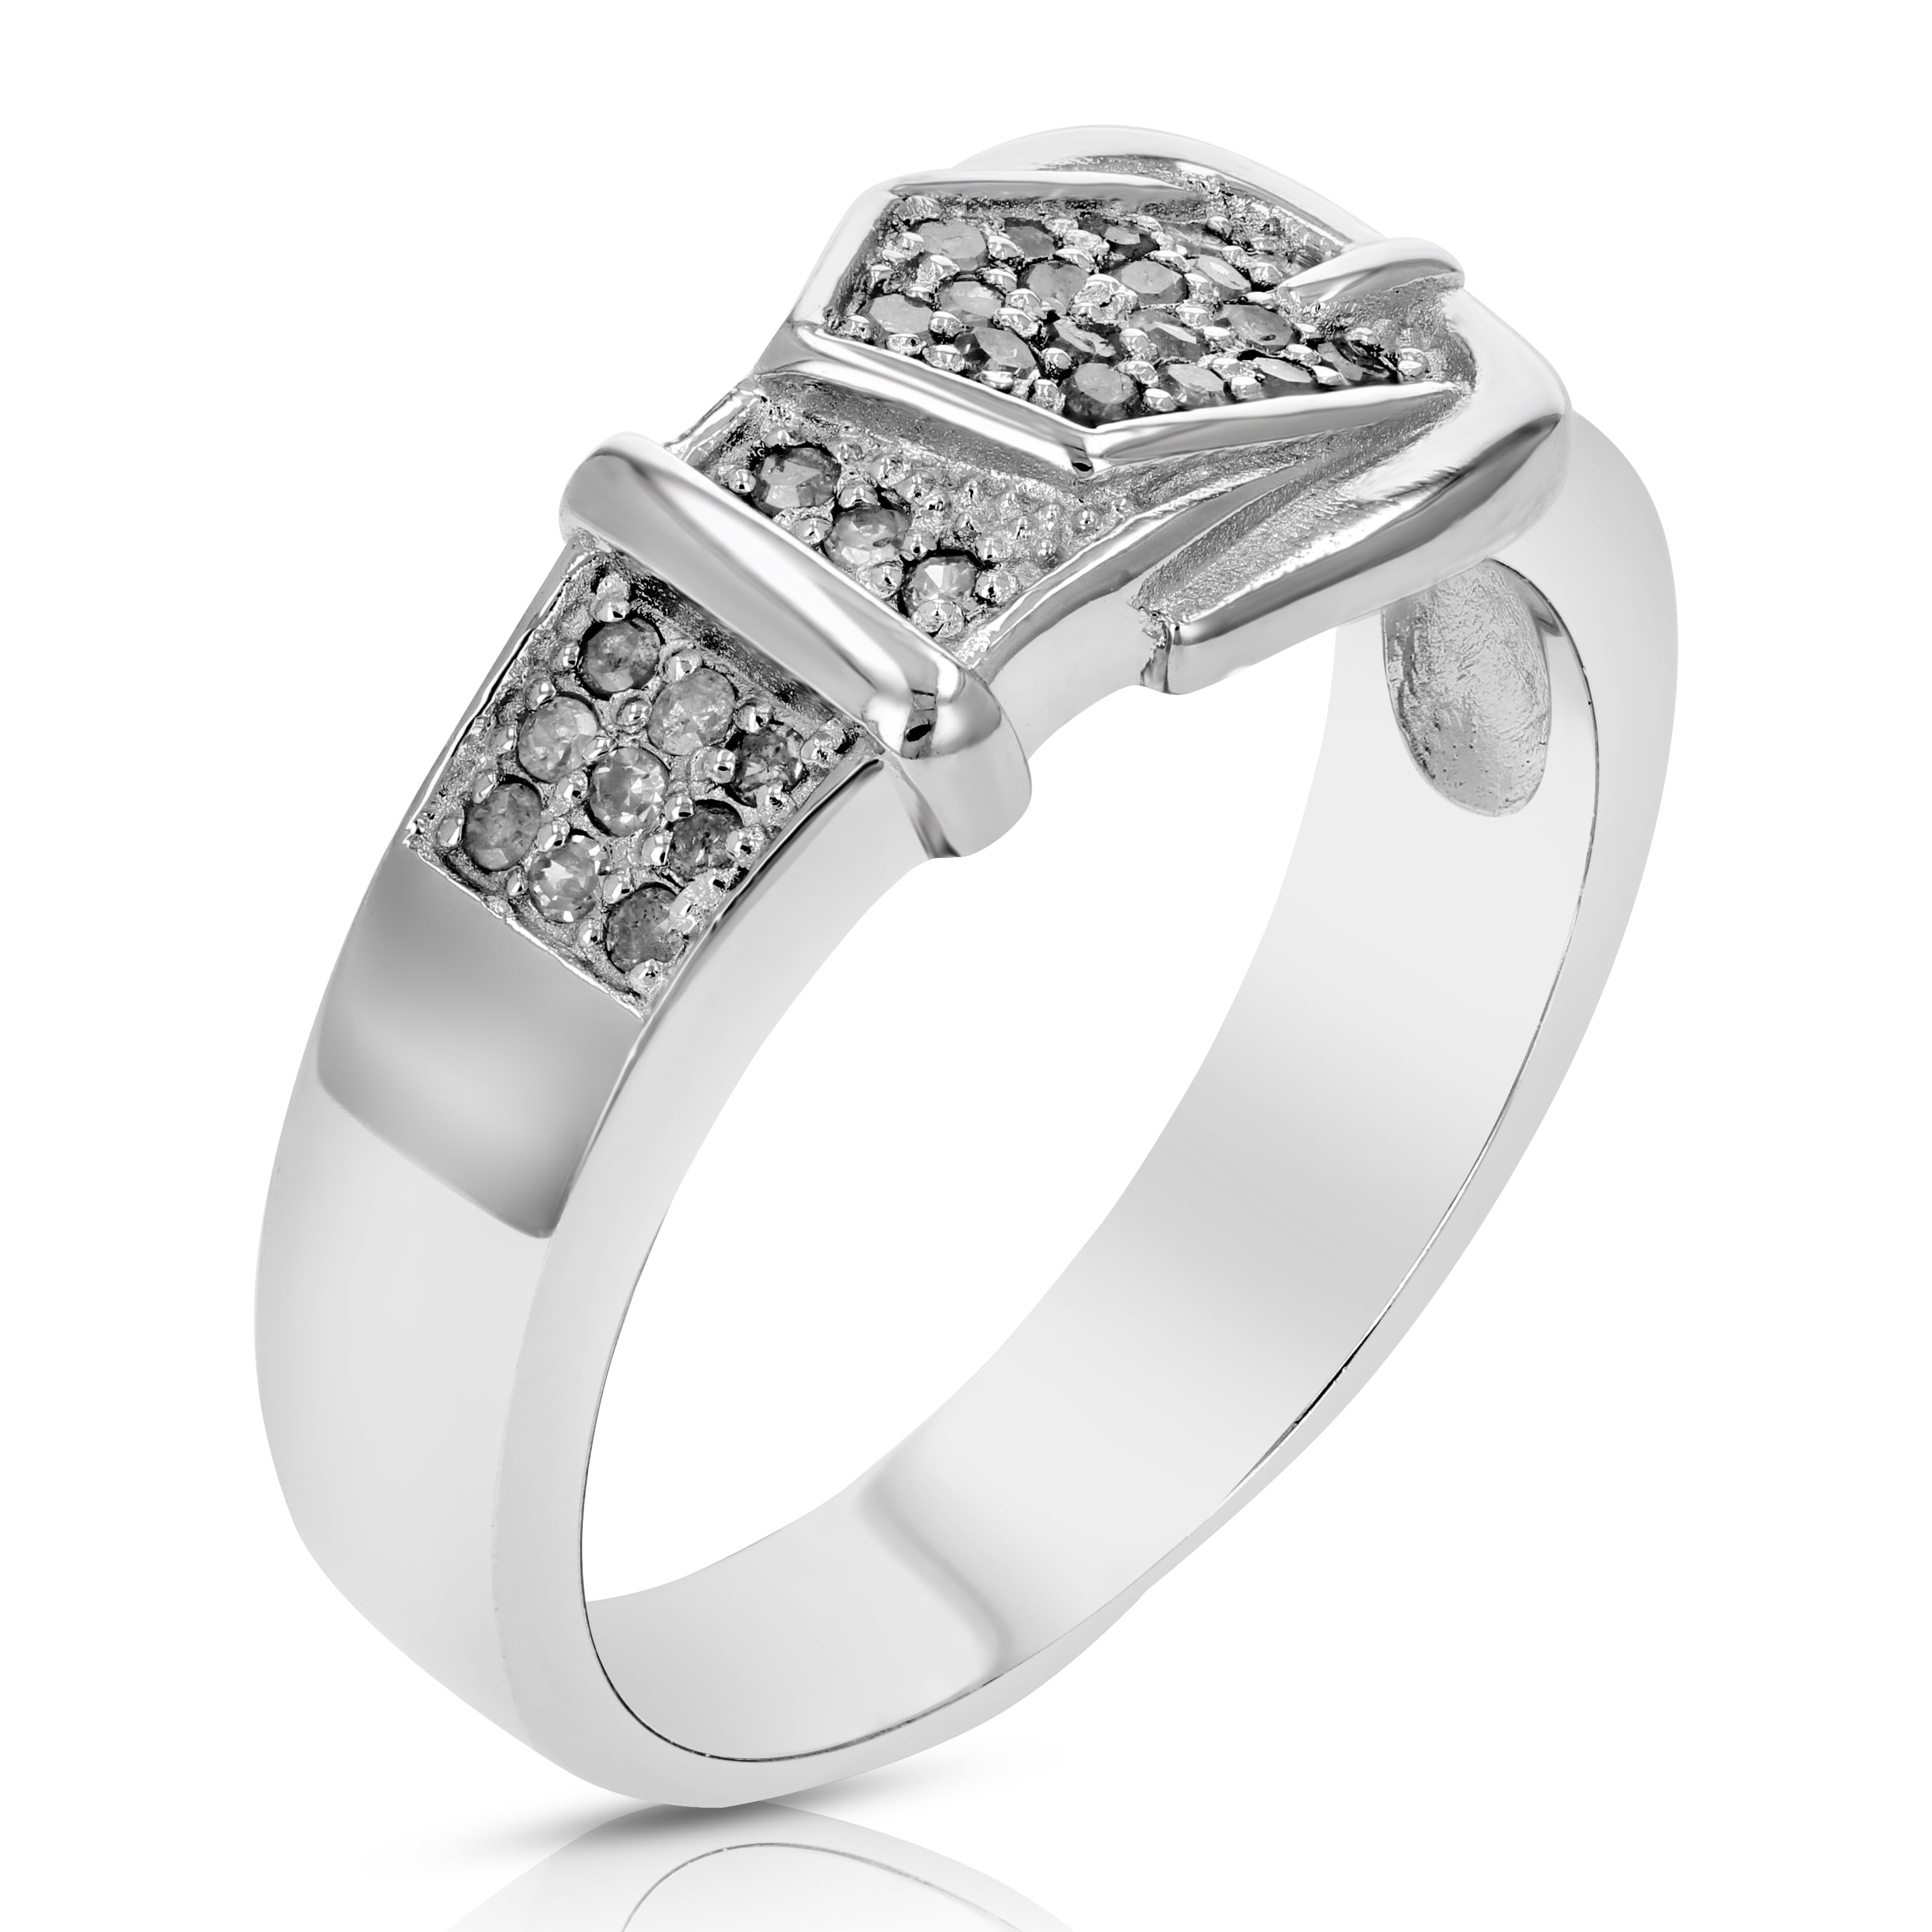 Sterling Silver Rhodium Plated Satin & Polished Diamond Mens Ring Color H-I, Clarity SI2-I1 